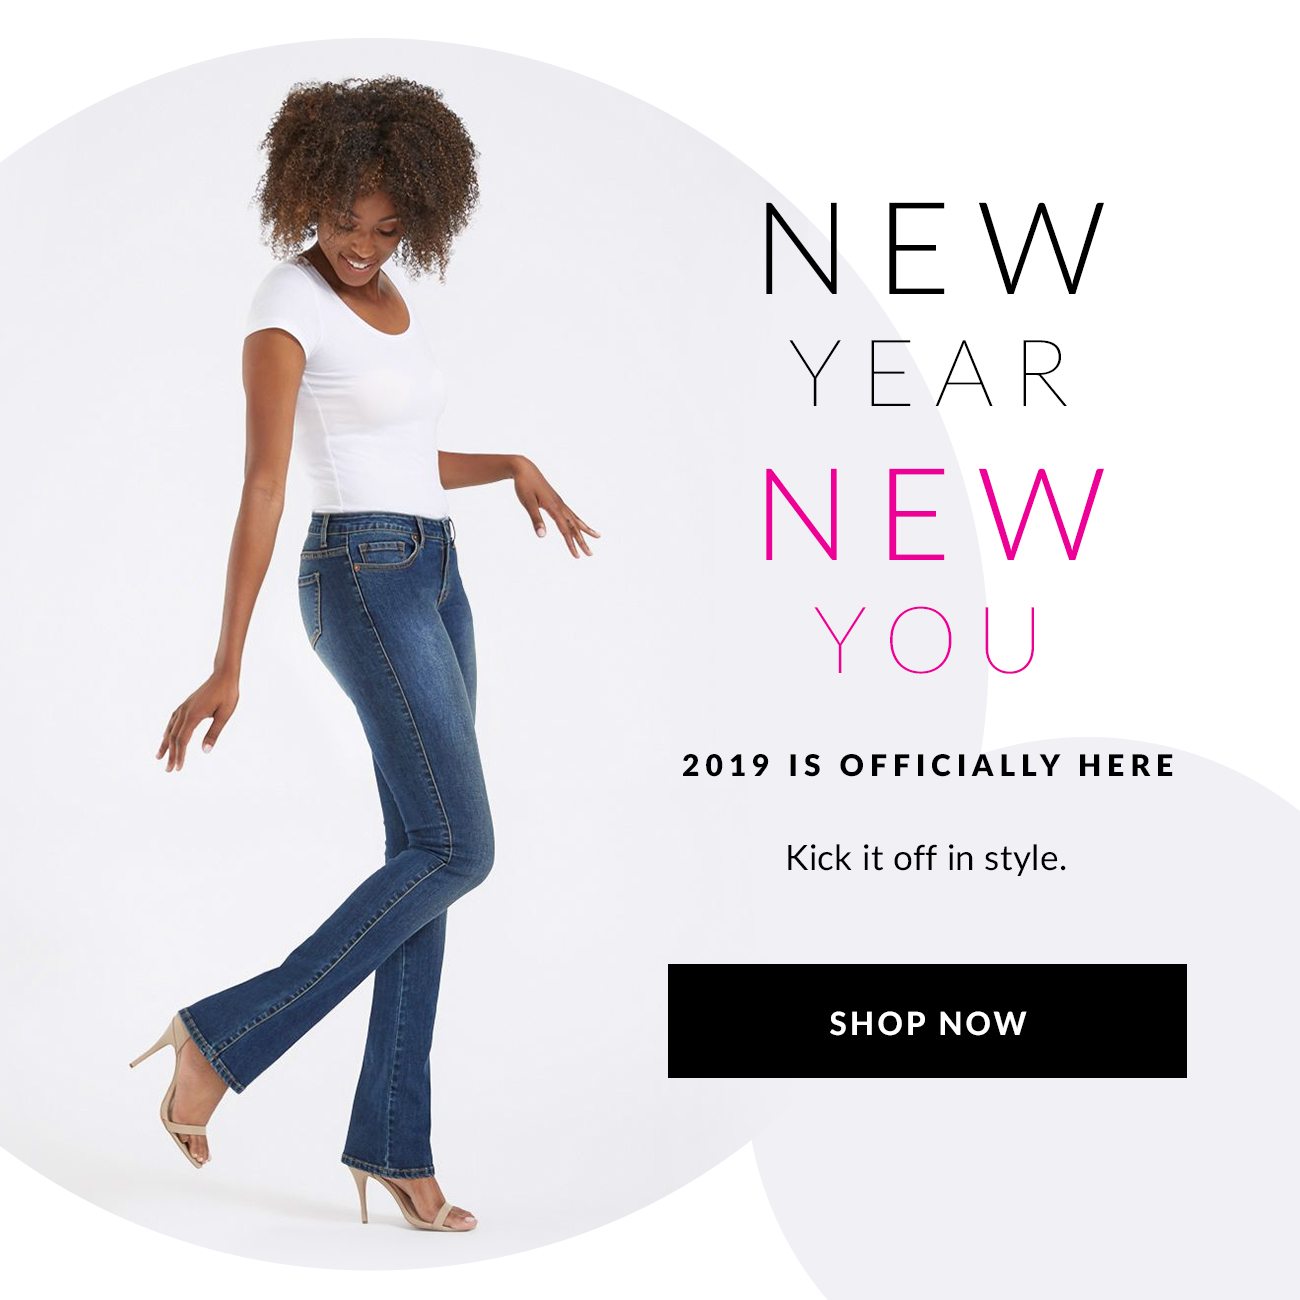 New Year New You - 2019 is Officially Here - Shop Now